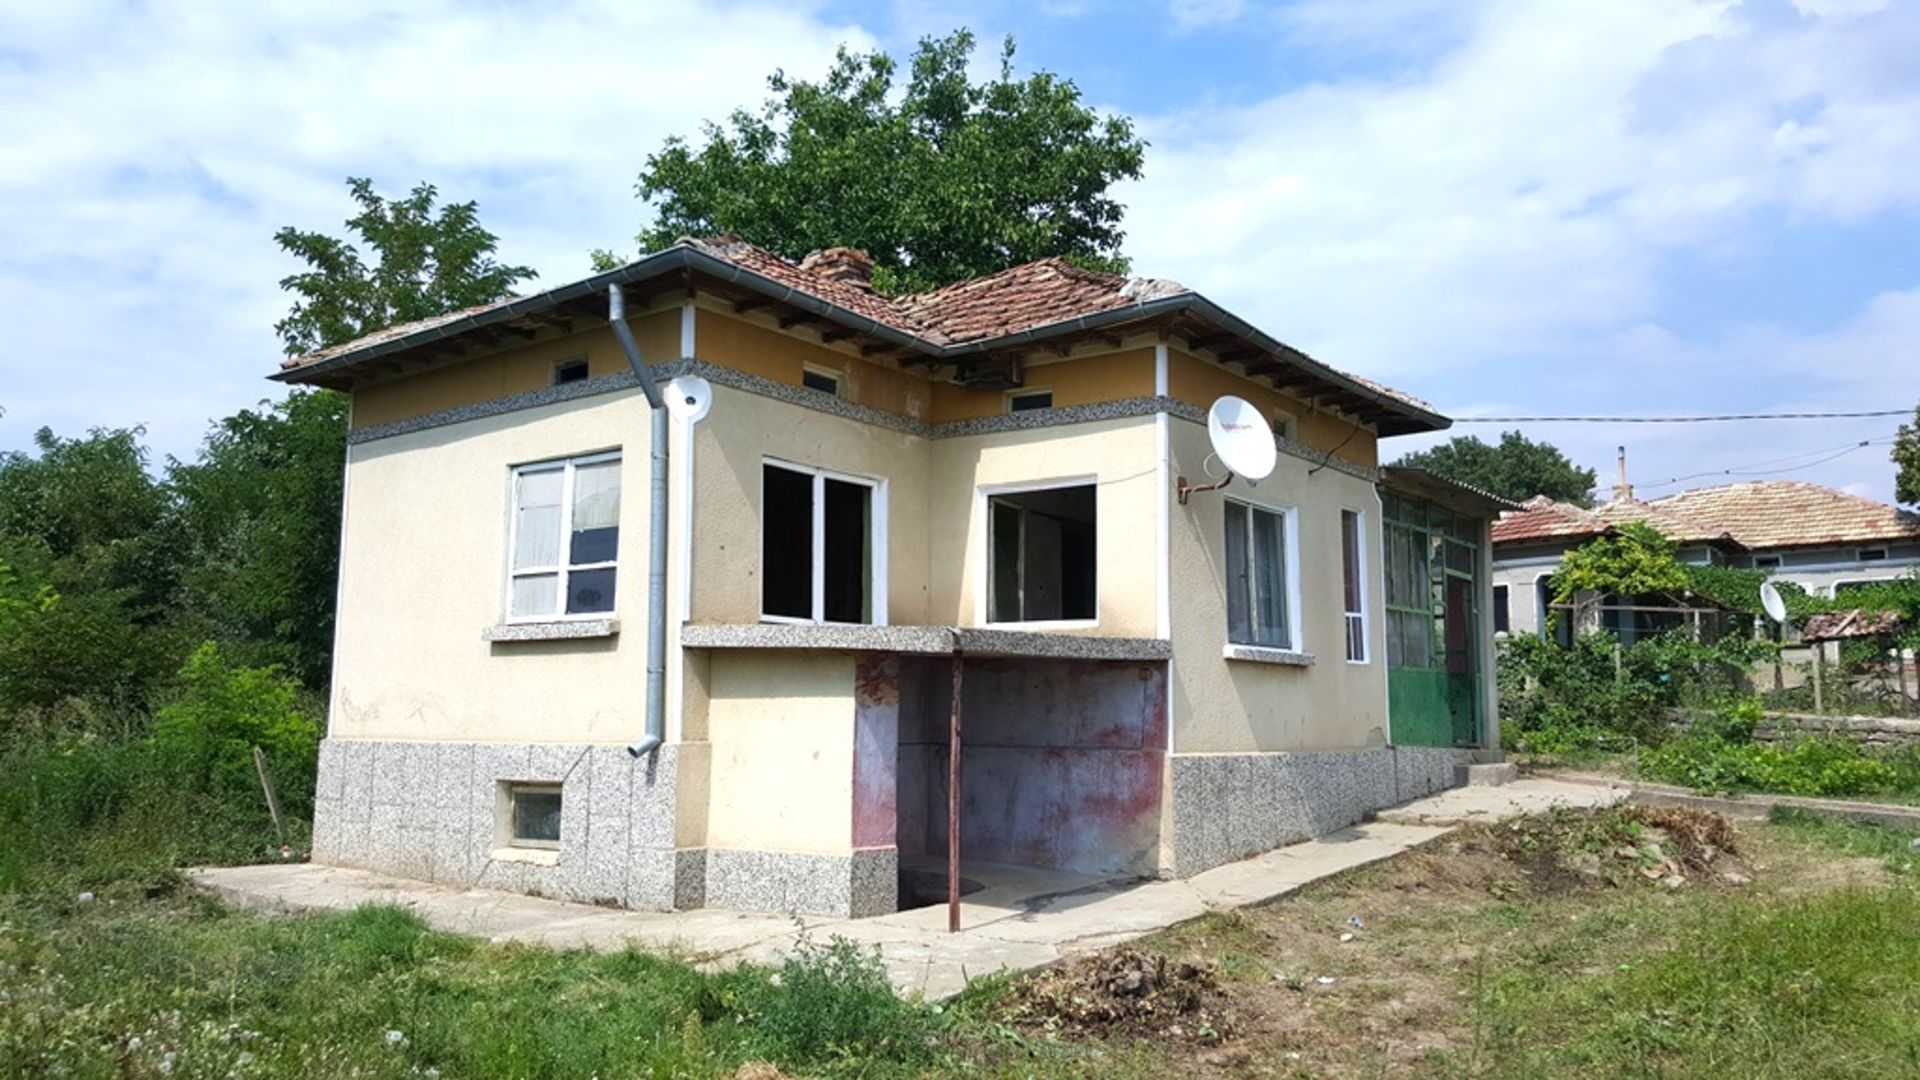 HOUSE AND 1,160 SQM OF LAND IN KRASEN, BULGARIA - Image 4 of 26